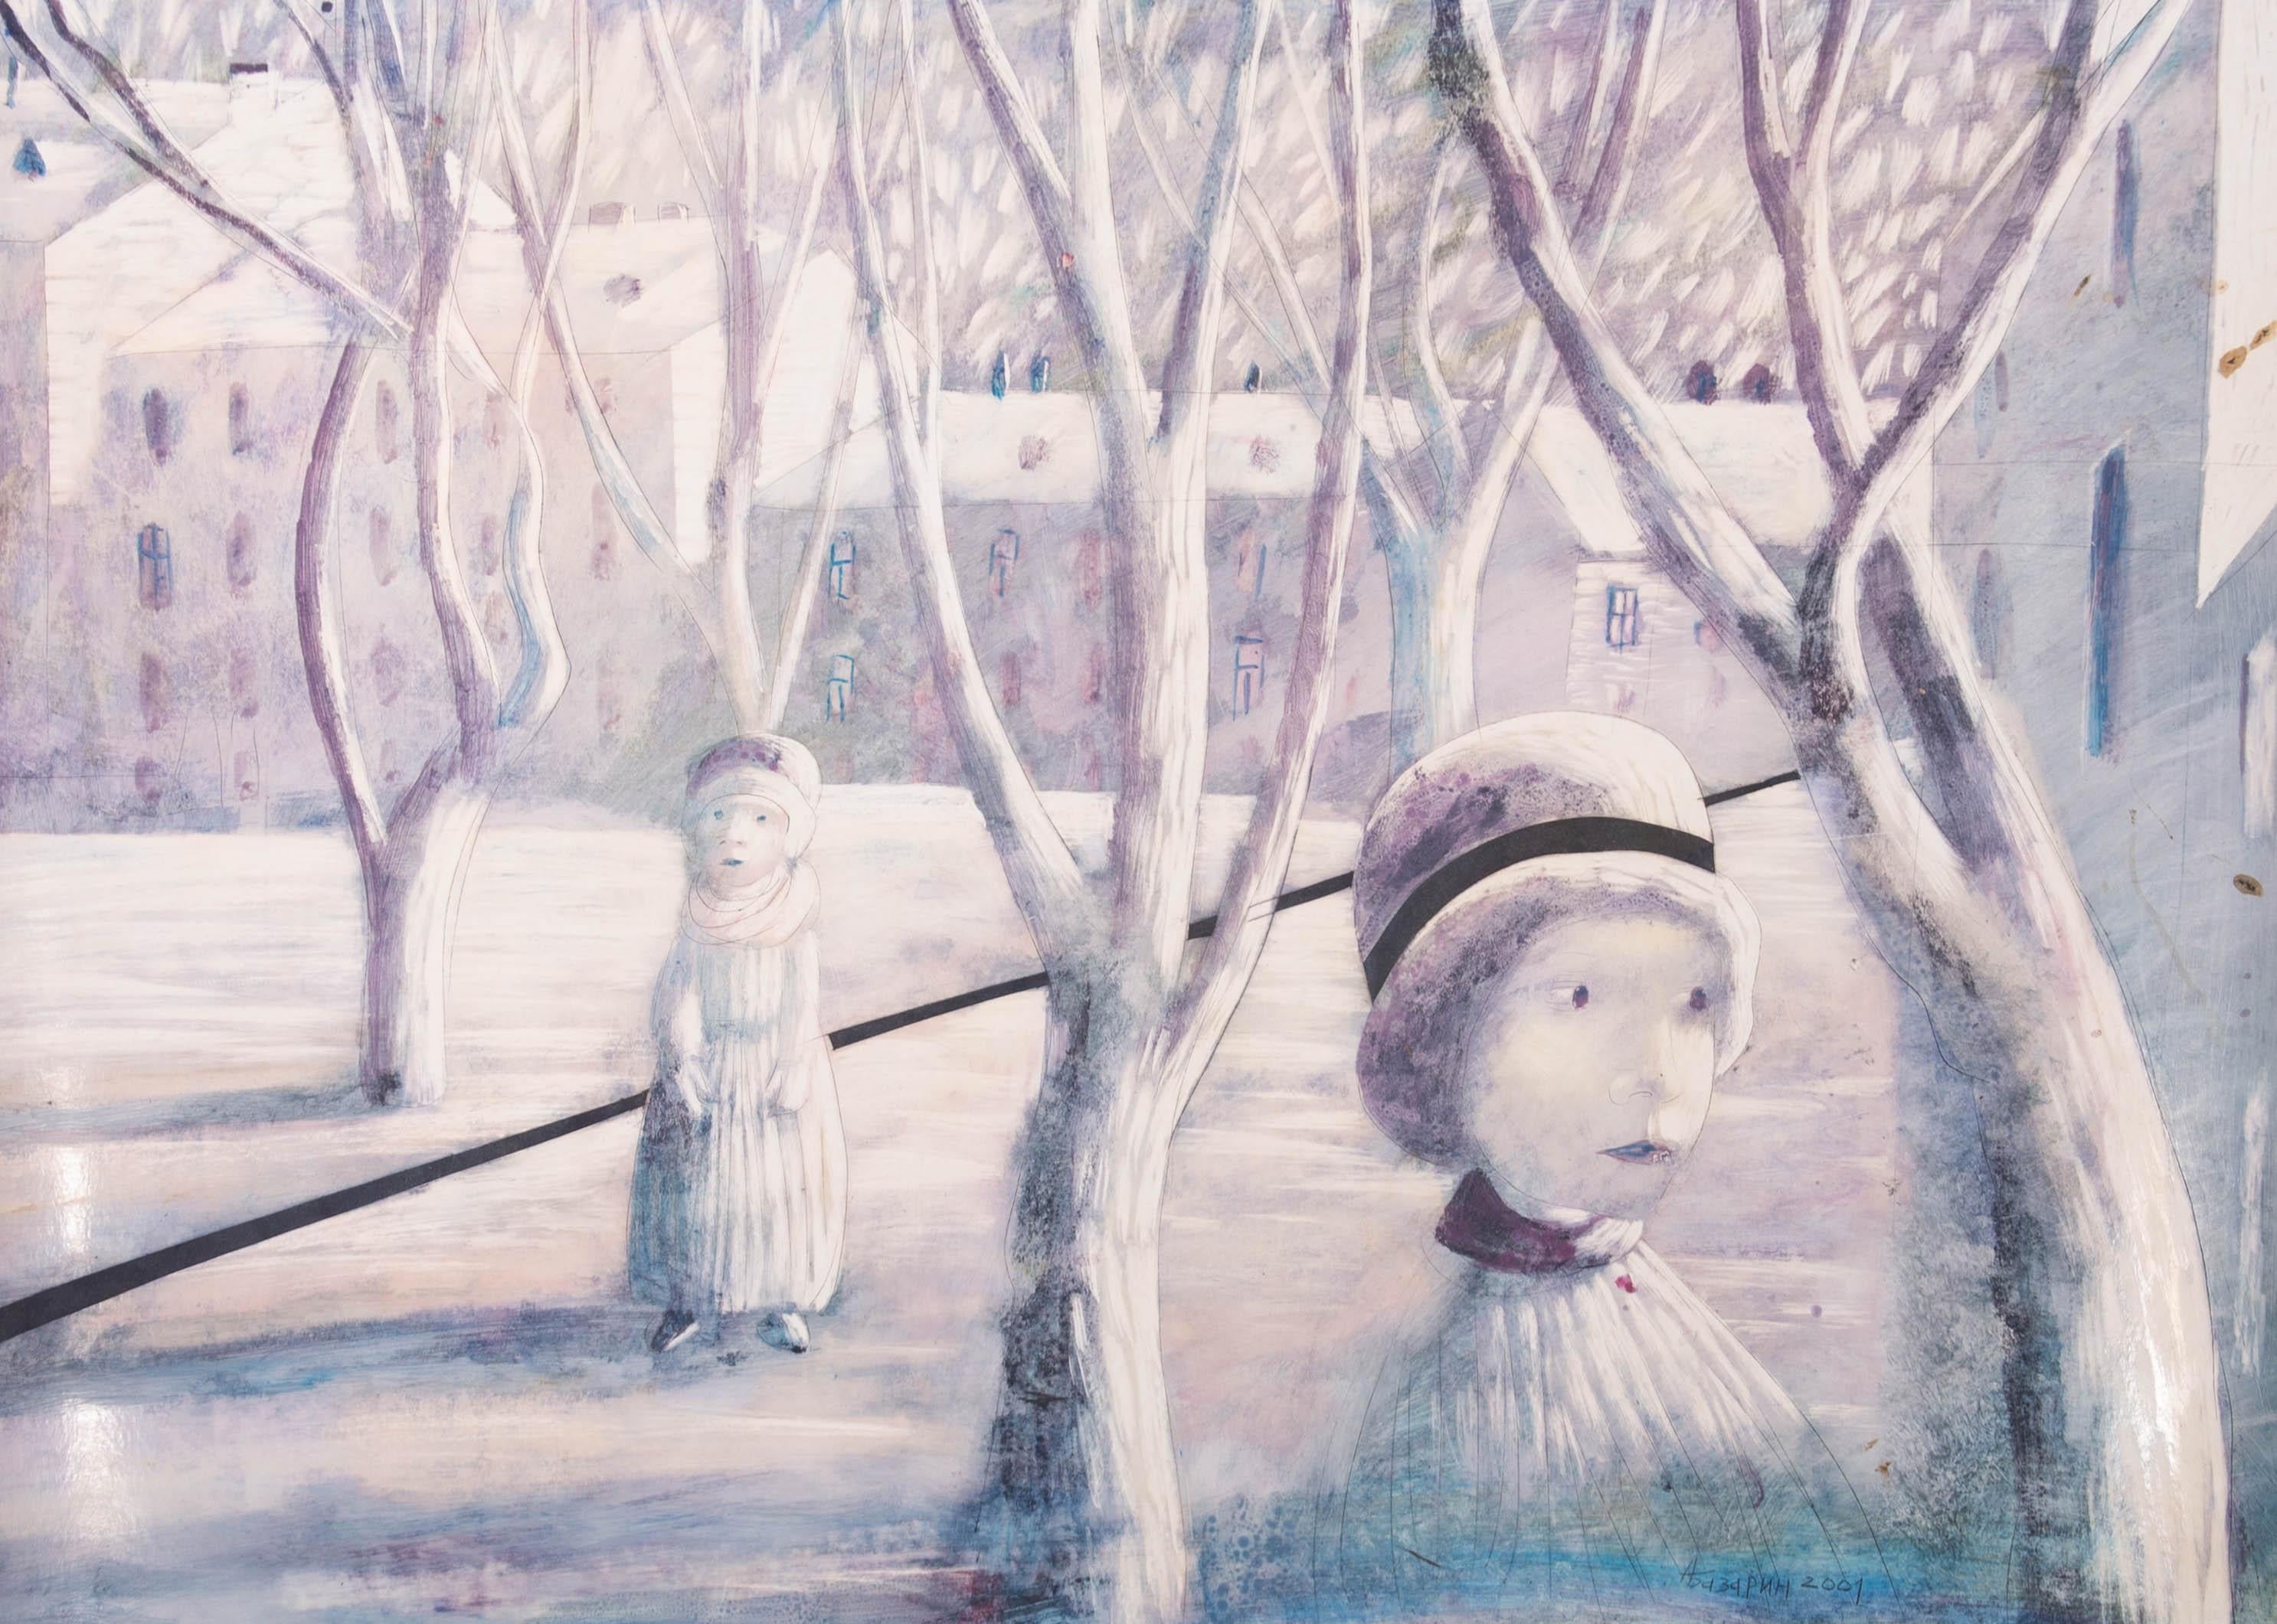 Am ethereal and dream like painting in the using the unusual technique of encaustic painting. The scene shows two lost looking children wandering through the snowy night in a Russian town. The artists has signed (in Russian) and dated to the lower